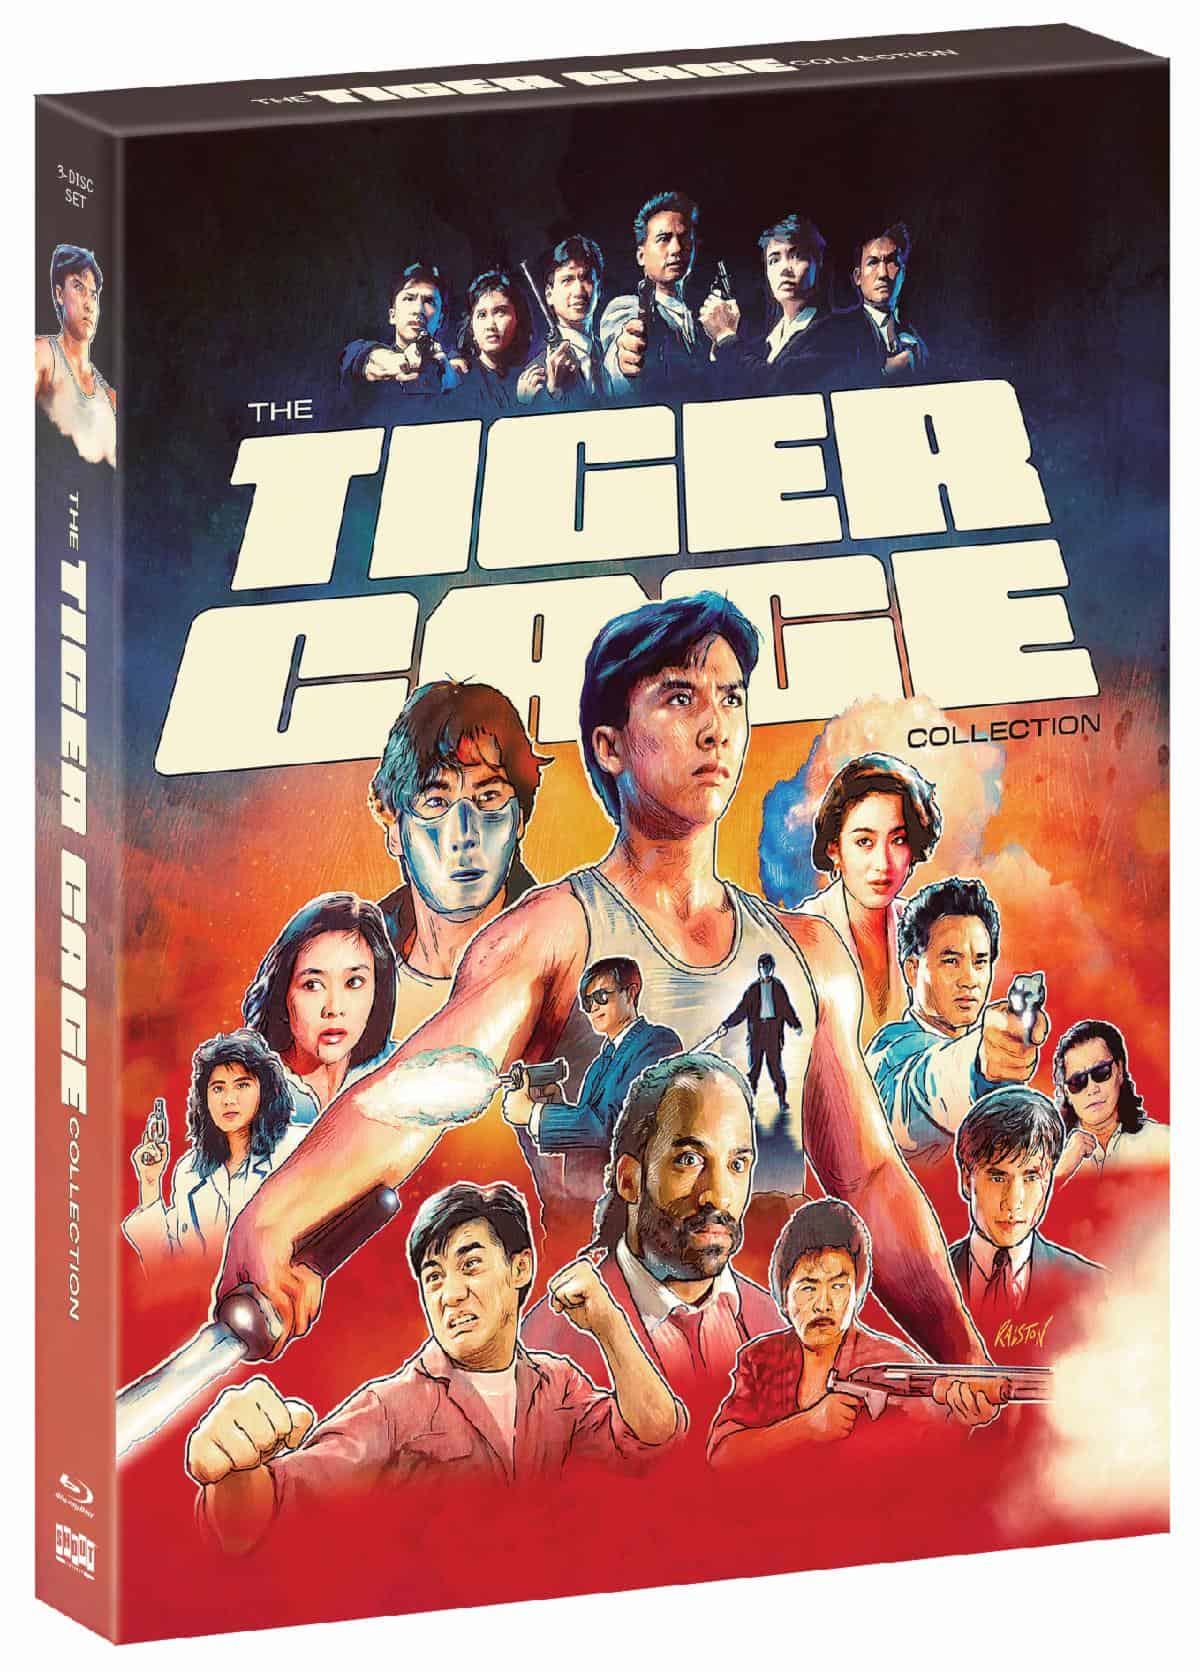 The Tiger Cage Collection hits Blu-ray on May 9th from Shout! 21